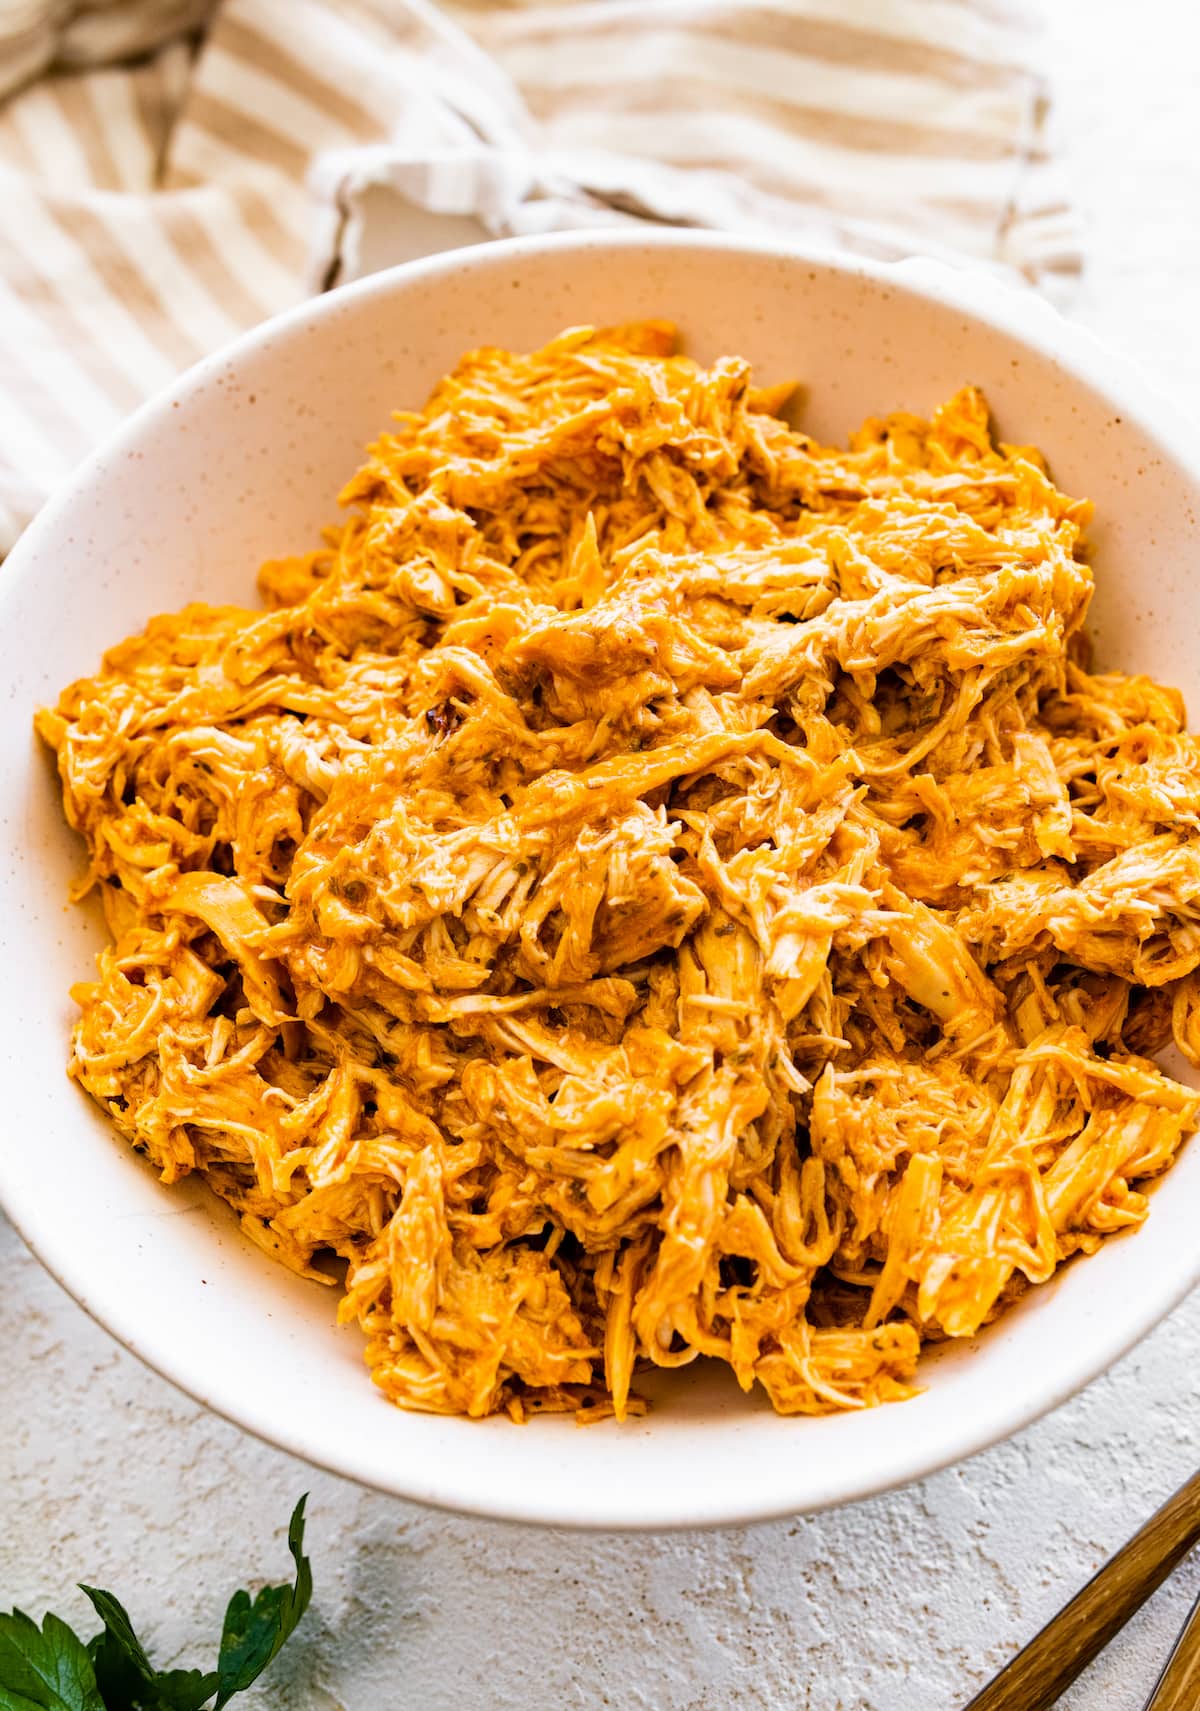 Slow cooked shredded buffalo chicken in a bowl.